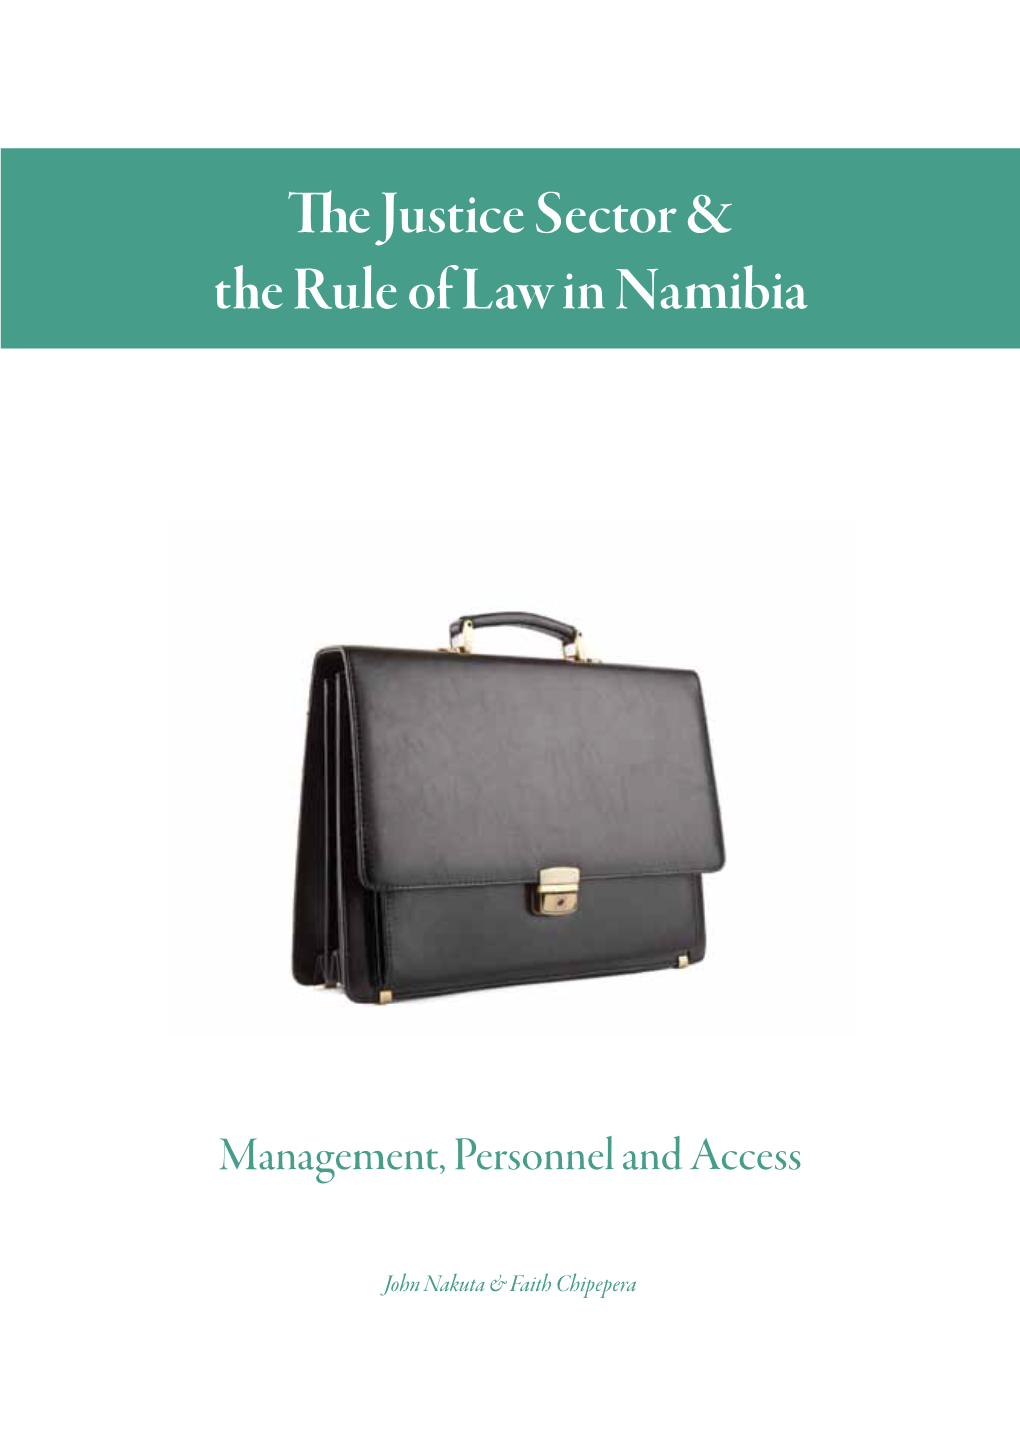 The Justice Sector & the Rule of Law in Namibia